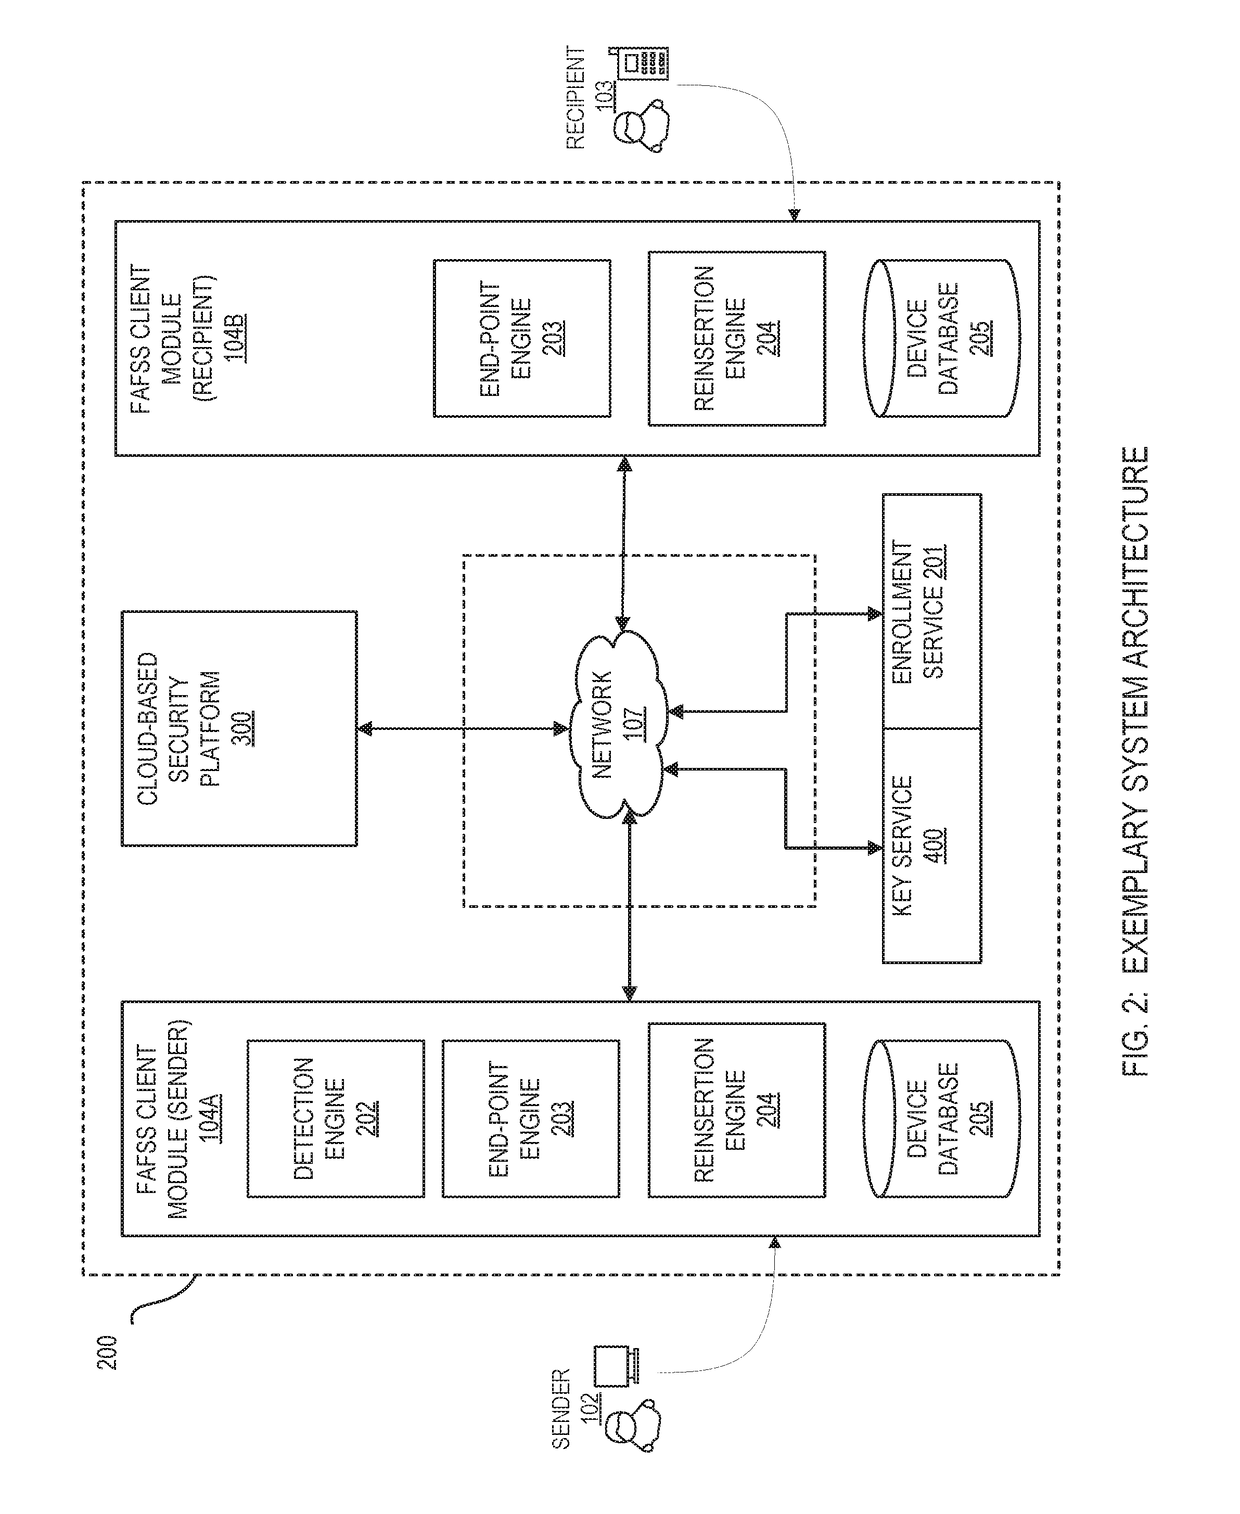 Systems and methods for encryption and provision of information security using platform services